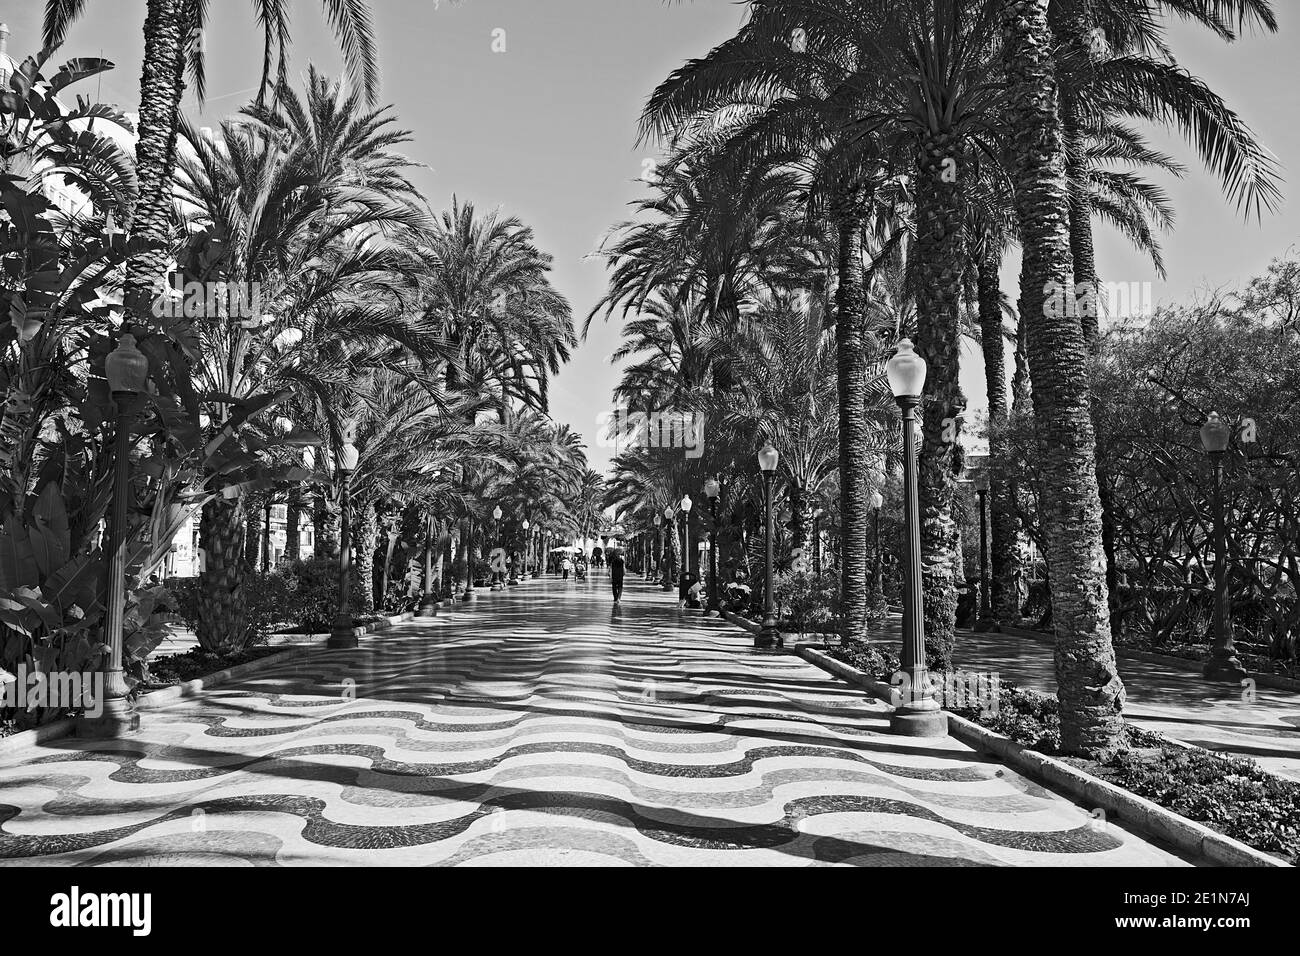 3D effect of wavy tiled paving along the Palm lined Esplanade de Espana in Alicante, Spain Stock Photo